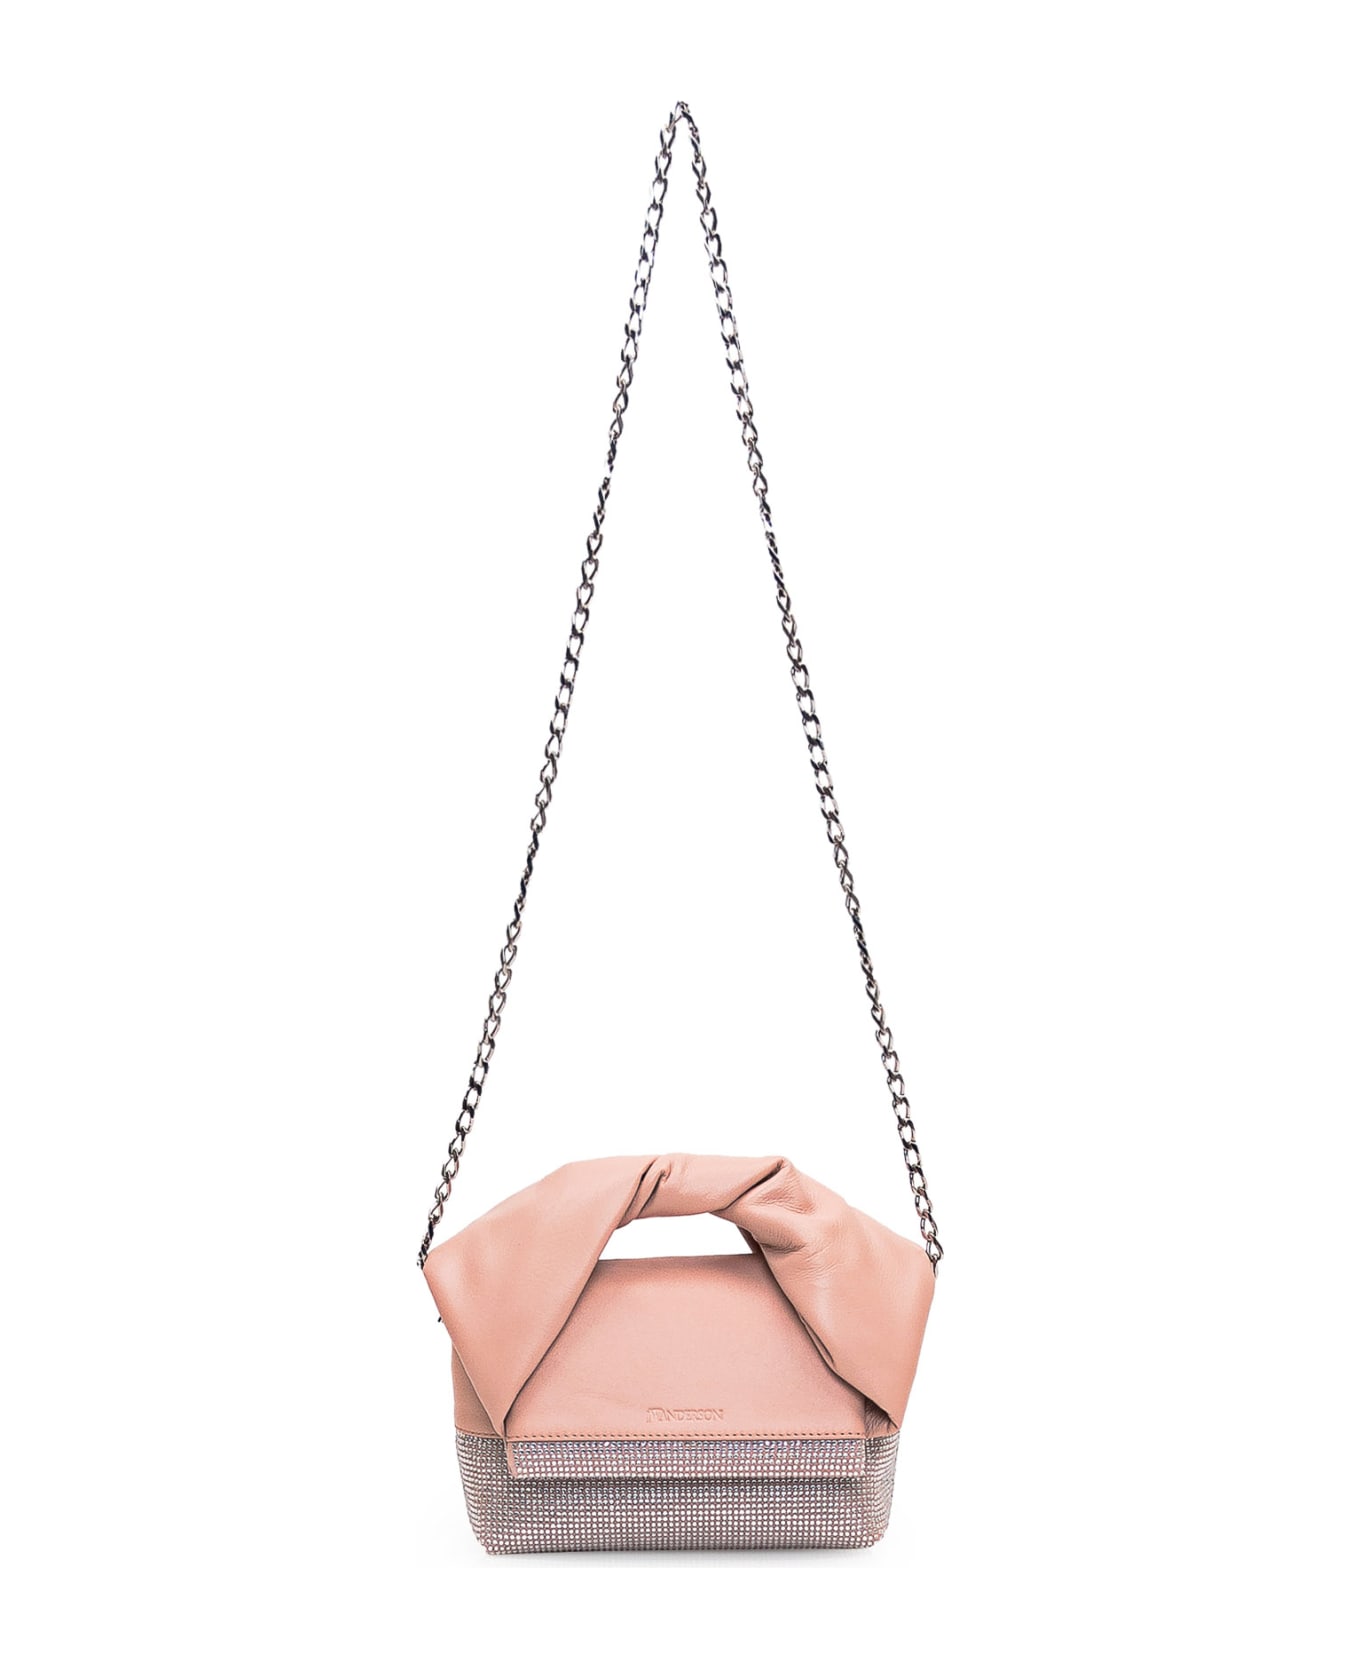 J.W. Anderson Small Twister Bag - DUSTY ROSE トートバッグ